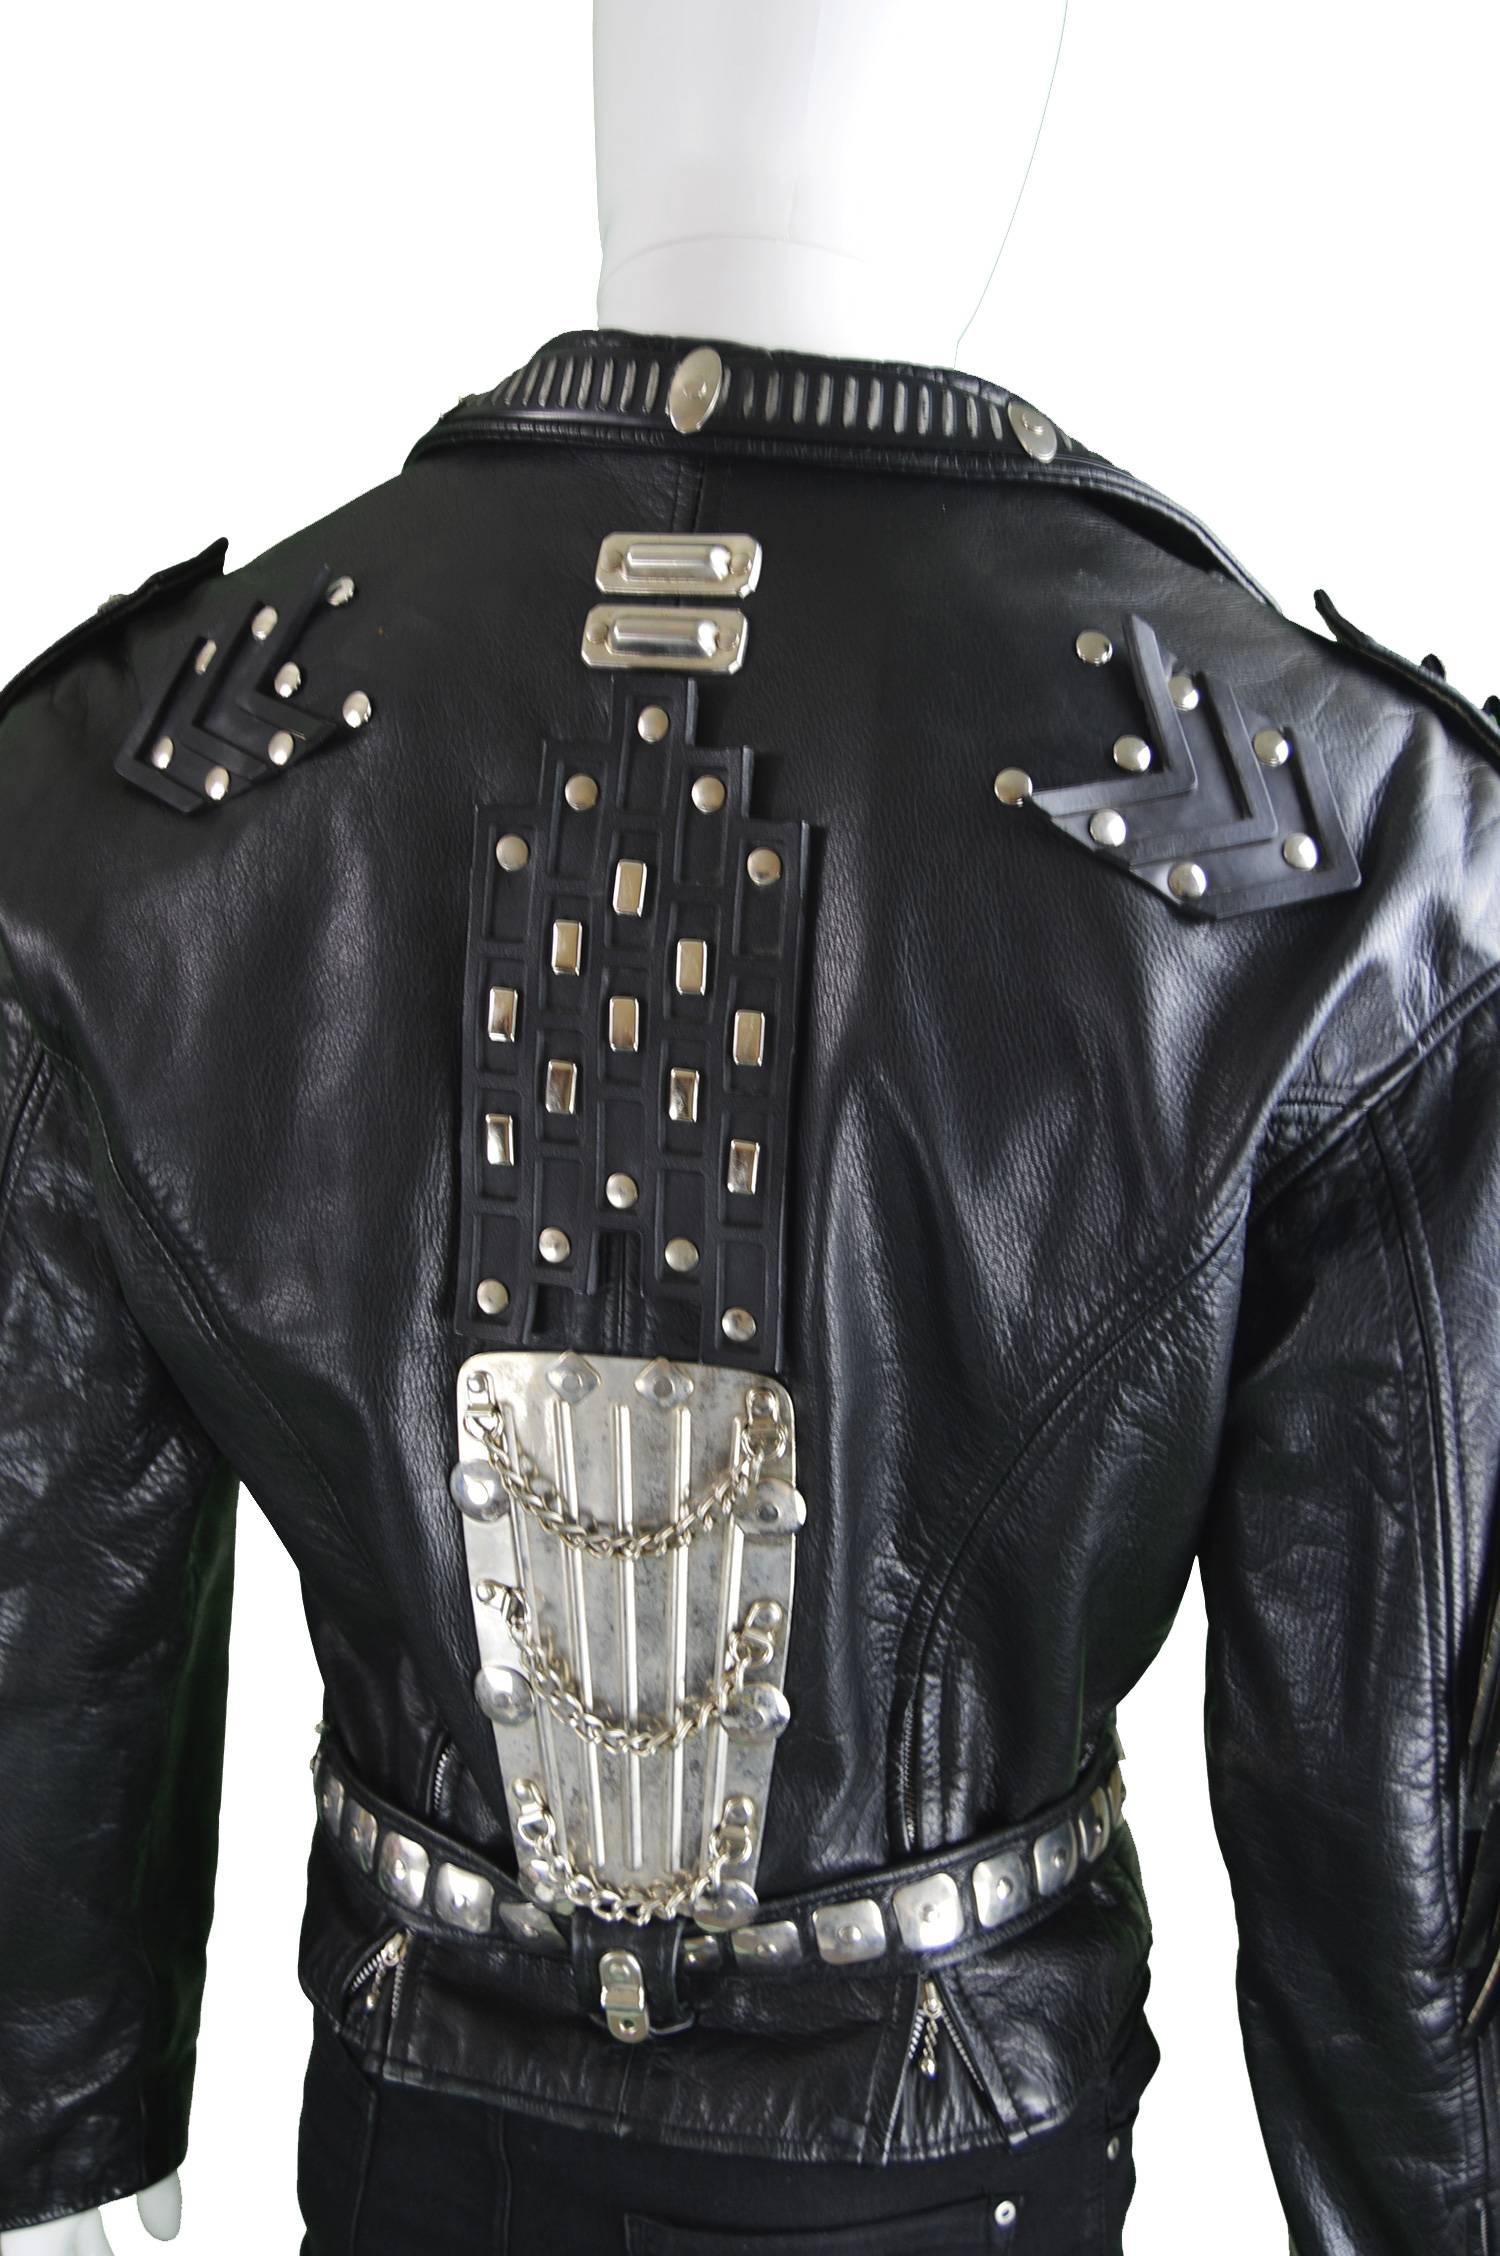 Kim Hadleigh Designs Vintage Men's Armor Plated Leather Jacket, 1980s 1